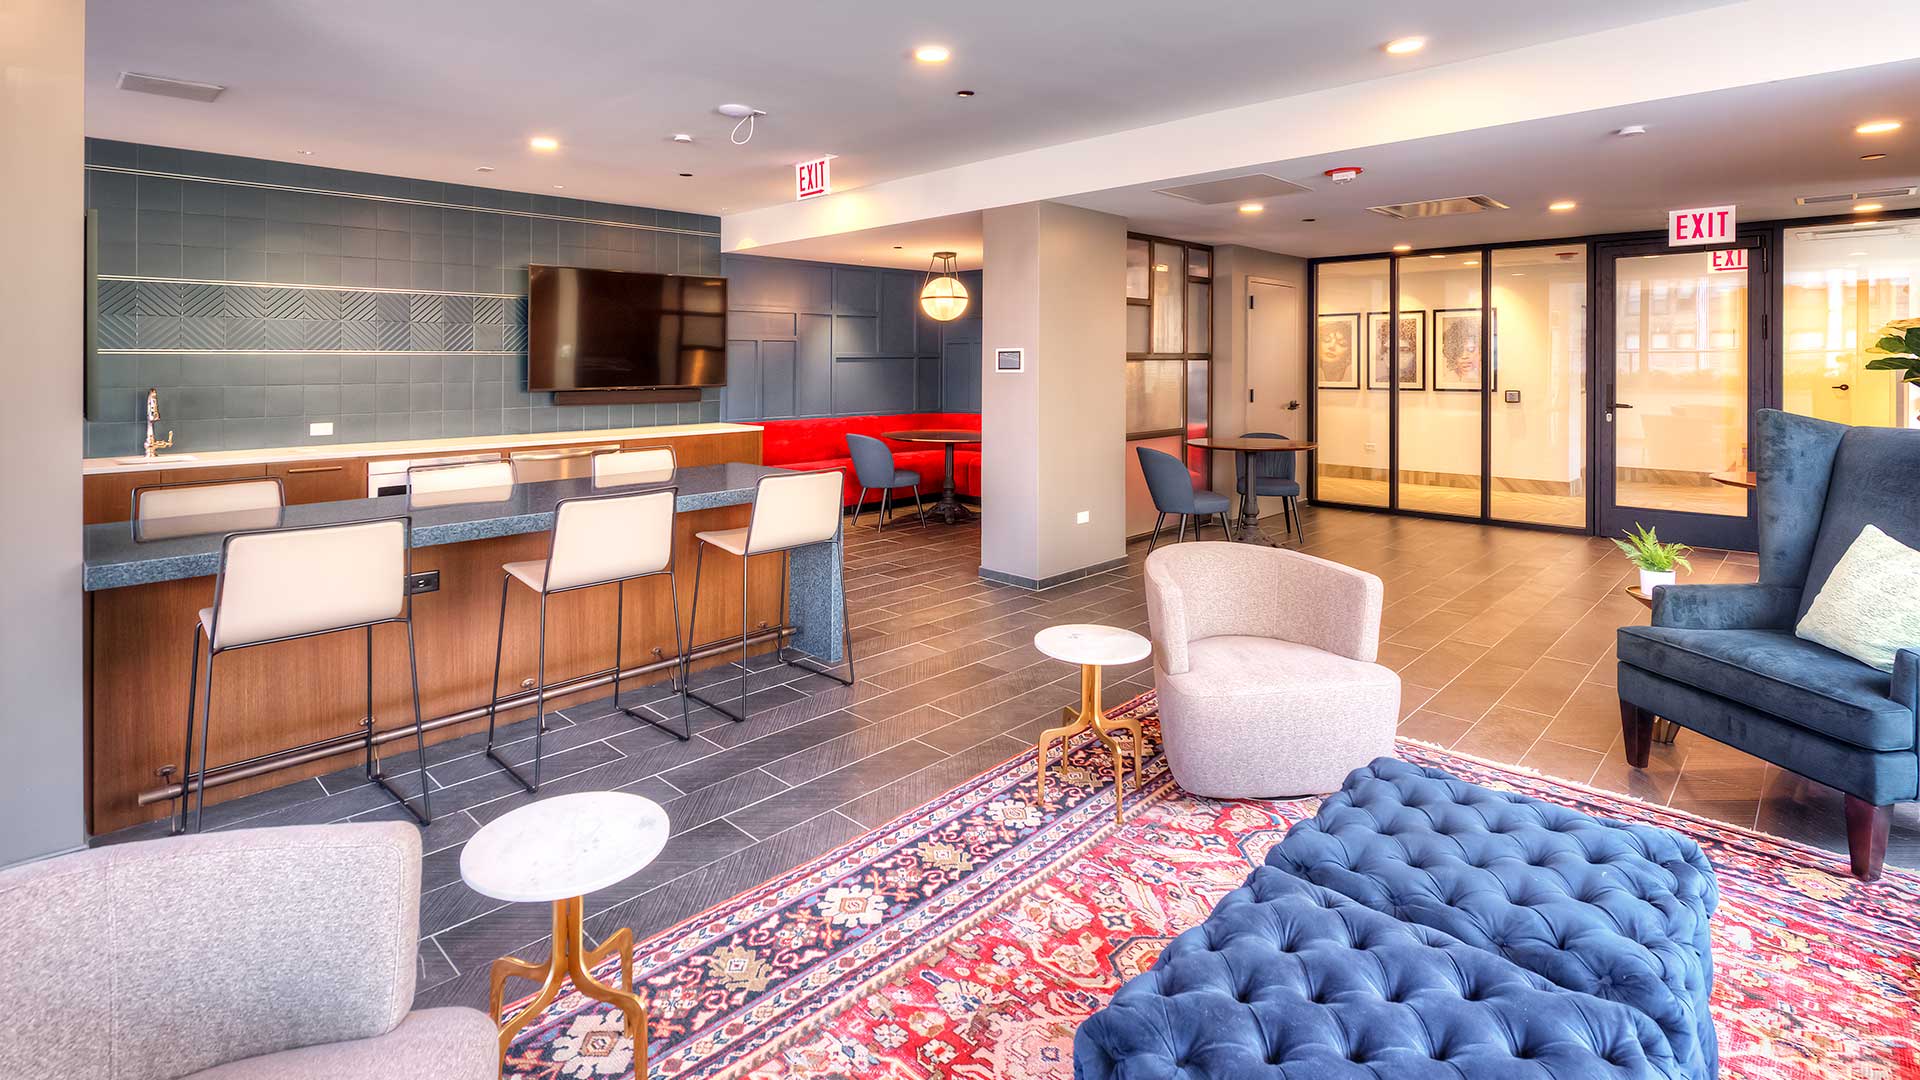 There is an ottoman and a few club chairs on a nice rug in the foreground. A bar and television are off to the left with bench seating extending back into a far corner. To the far right is a glass wall and the entrance to the clubroom.